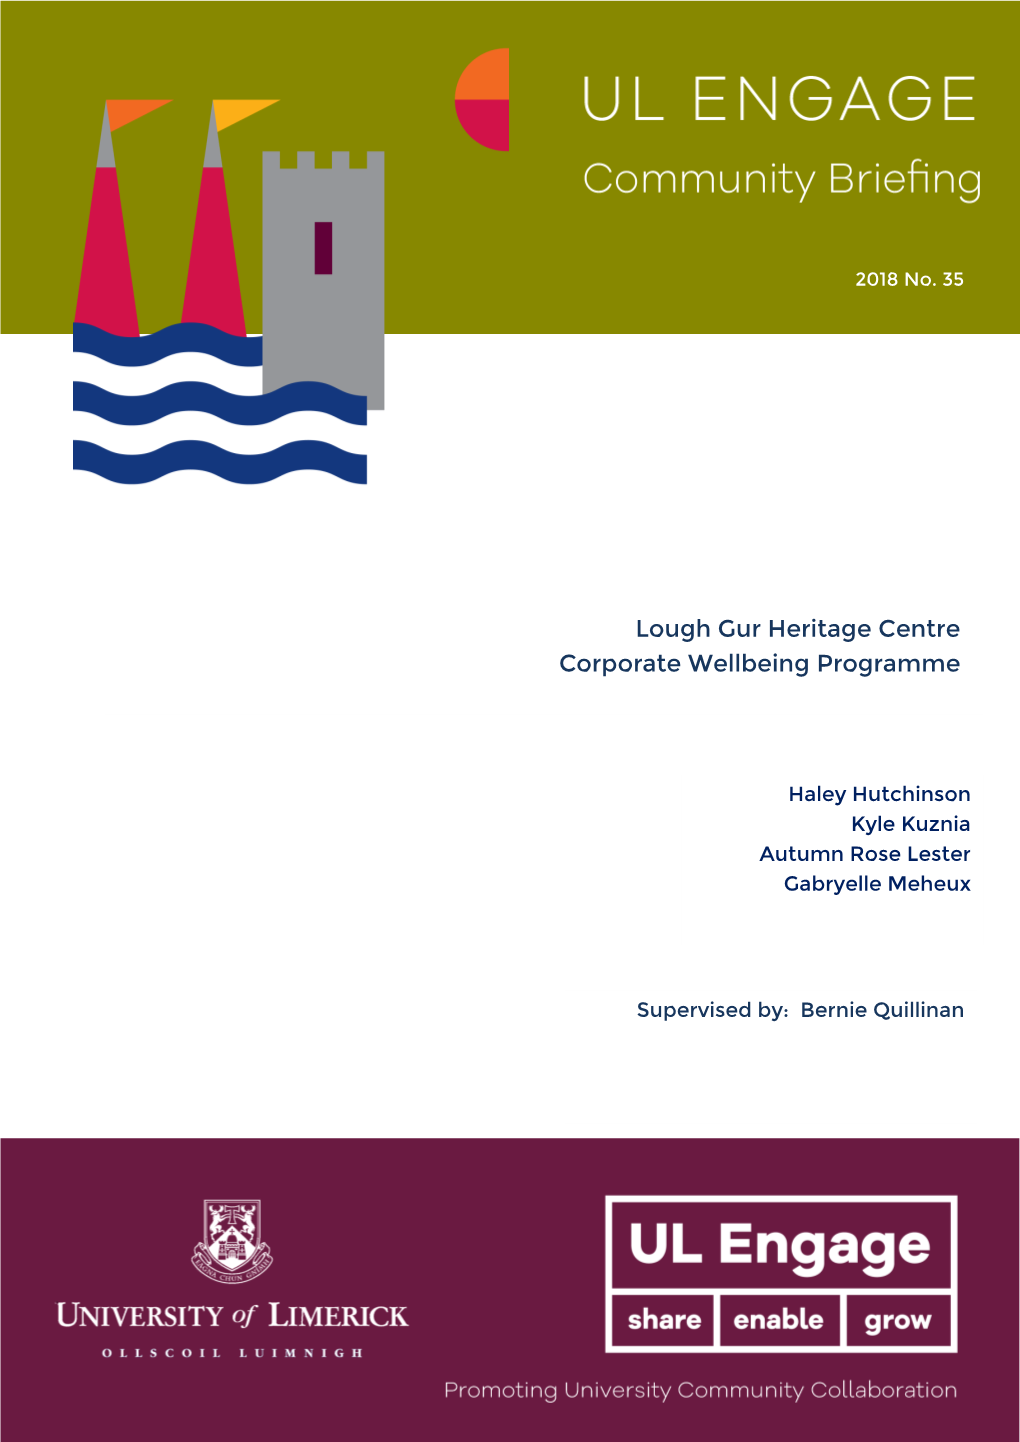 Lough Gur Heritage Centre Corporate Wellbeing Programme